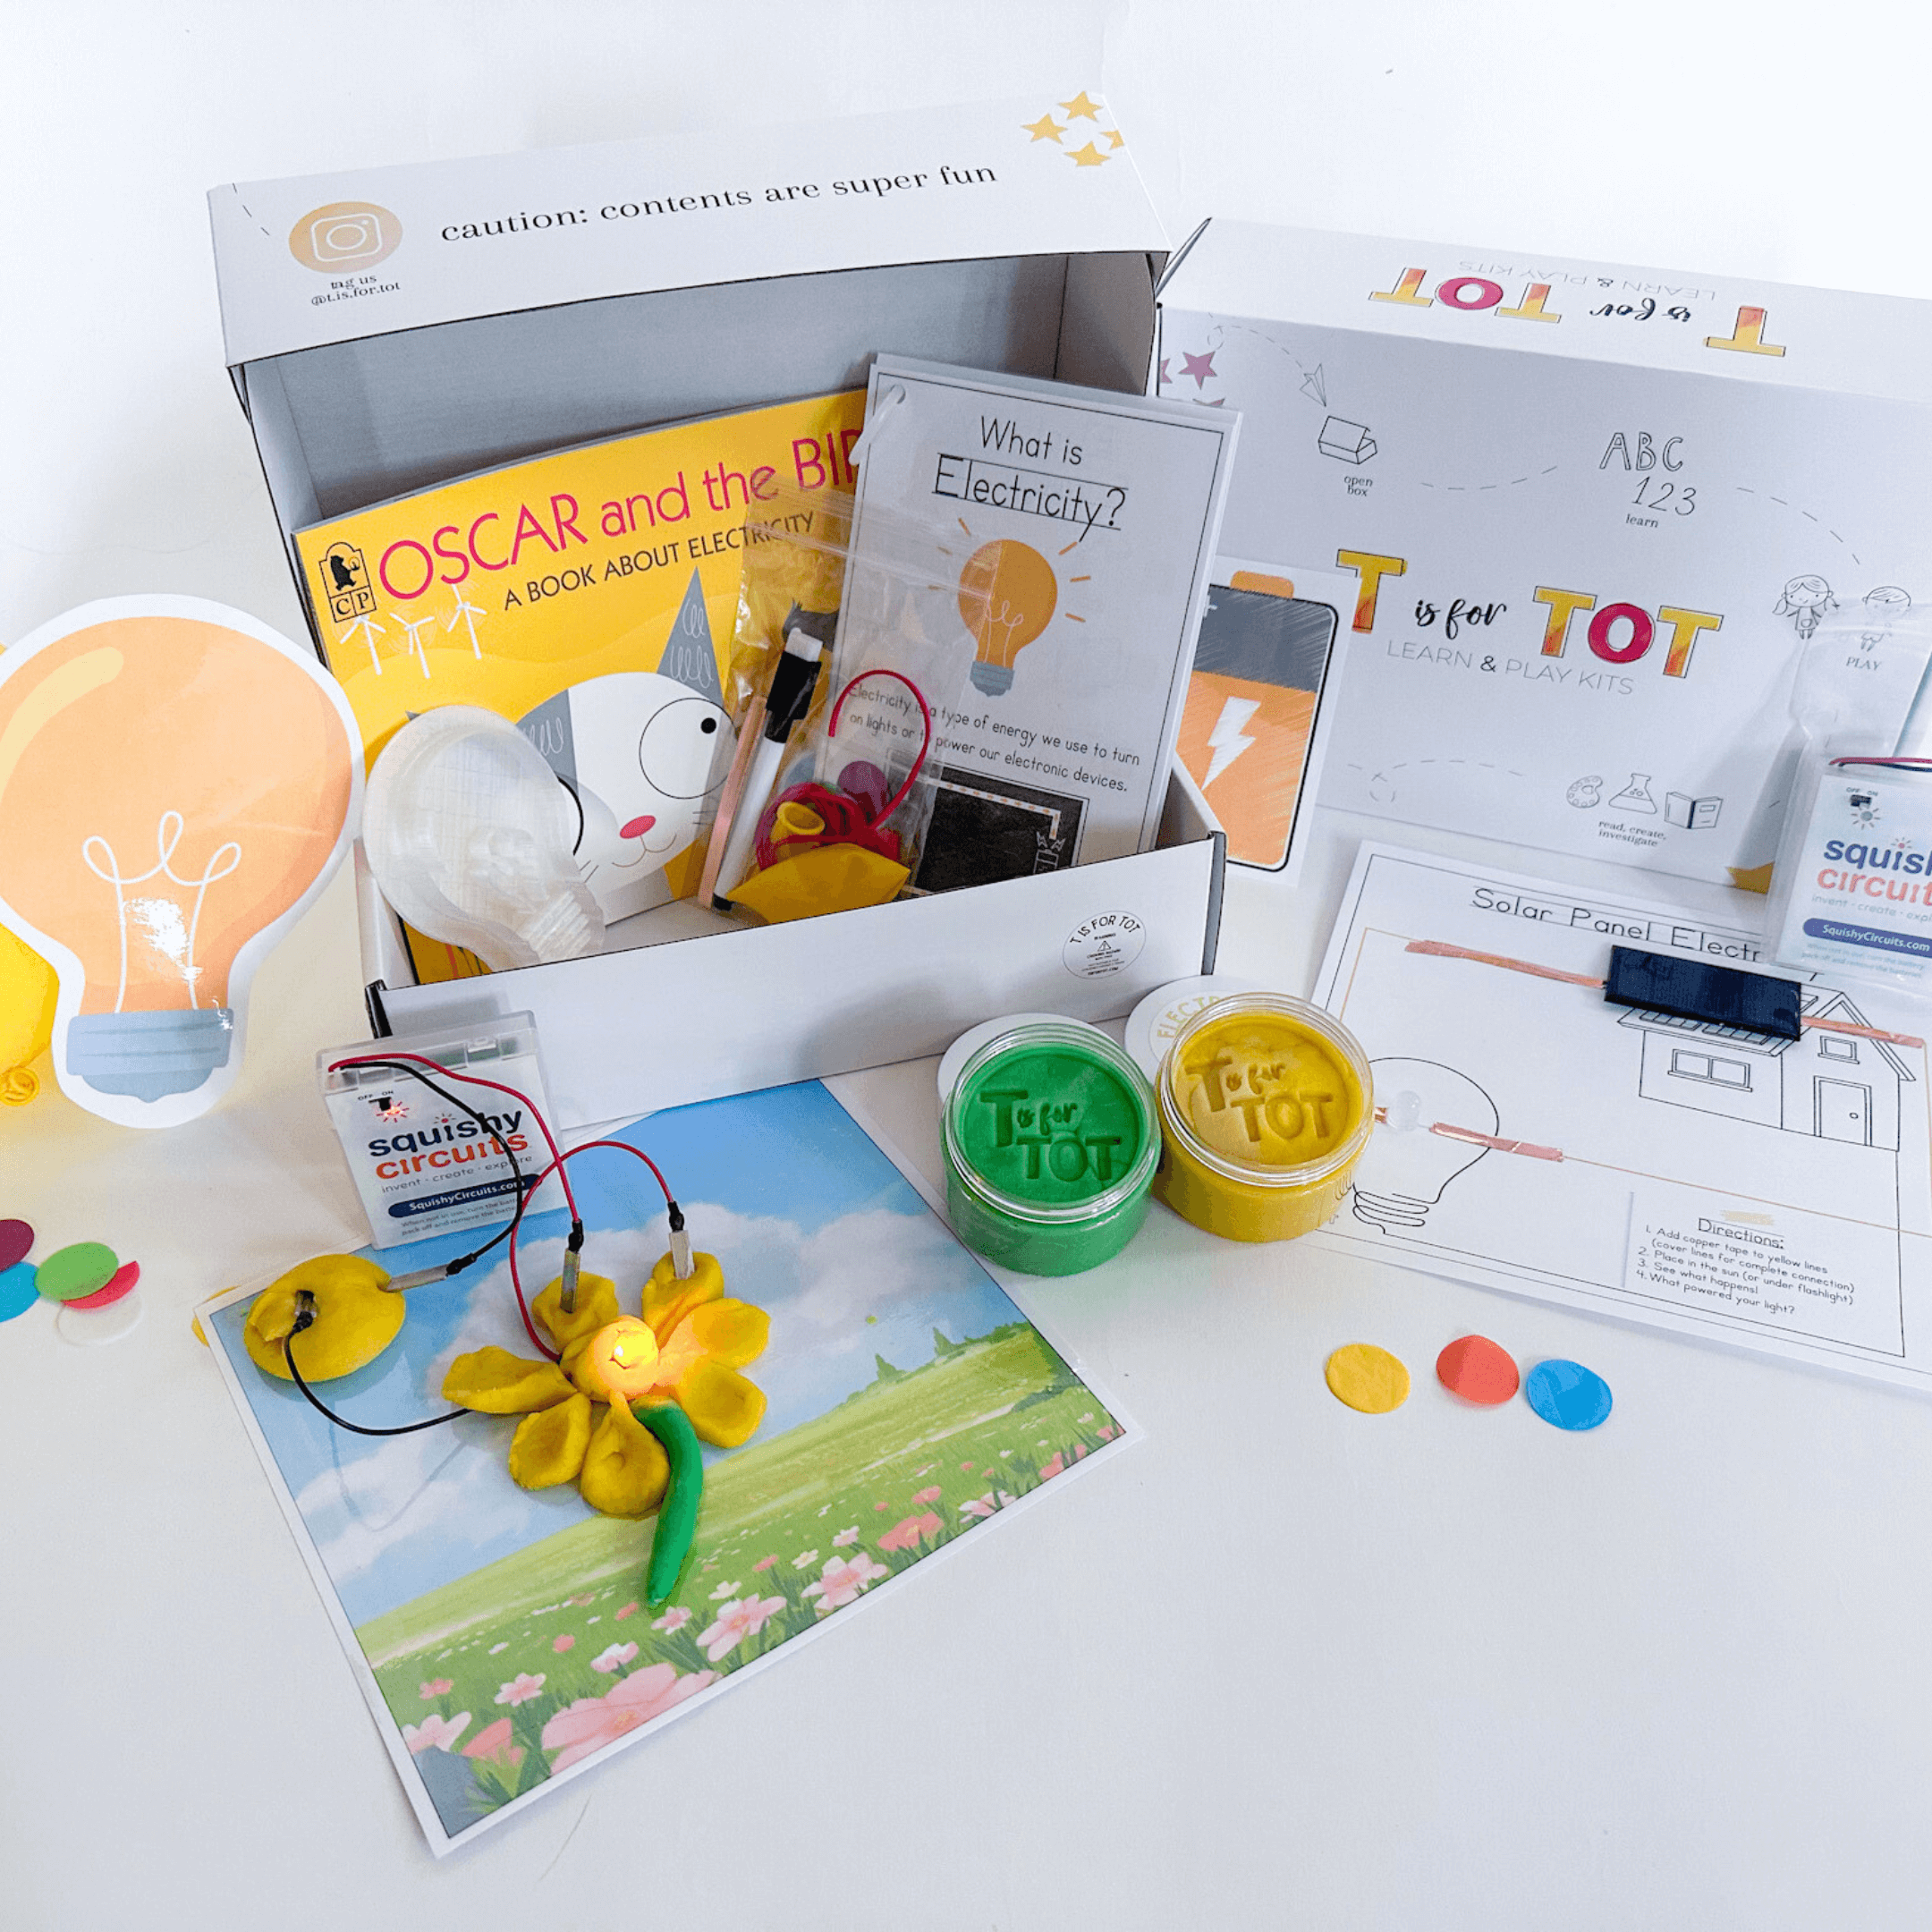 Electricity learning kit for kids with all the components for hands-on experiments. Includes Squishy Circuits battery pack and light with batteries, homemade playdough with lightbulb playdough cutter, and static and solar electricity experiments. Comes with 